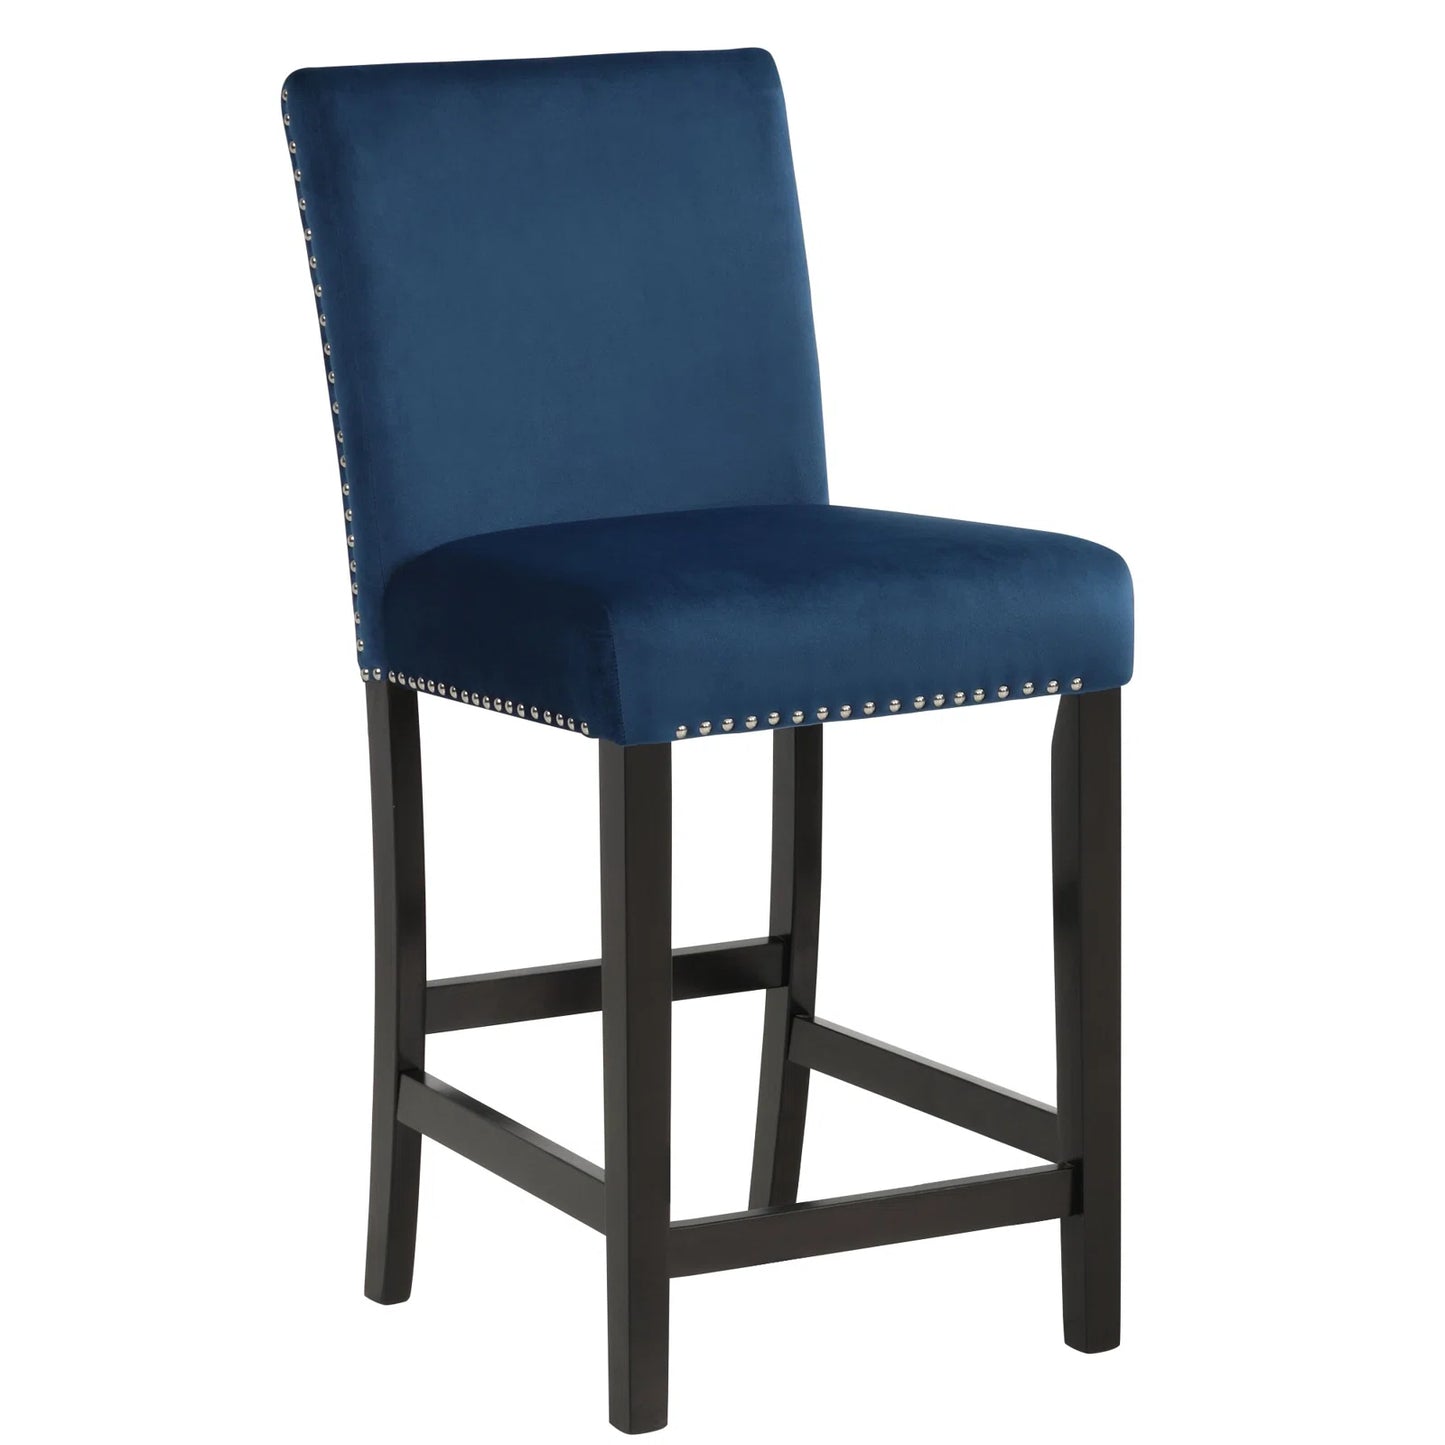 TALL BLUE VELVET DINING CHAIRS WITH SILVER RIVETS